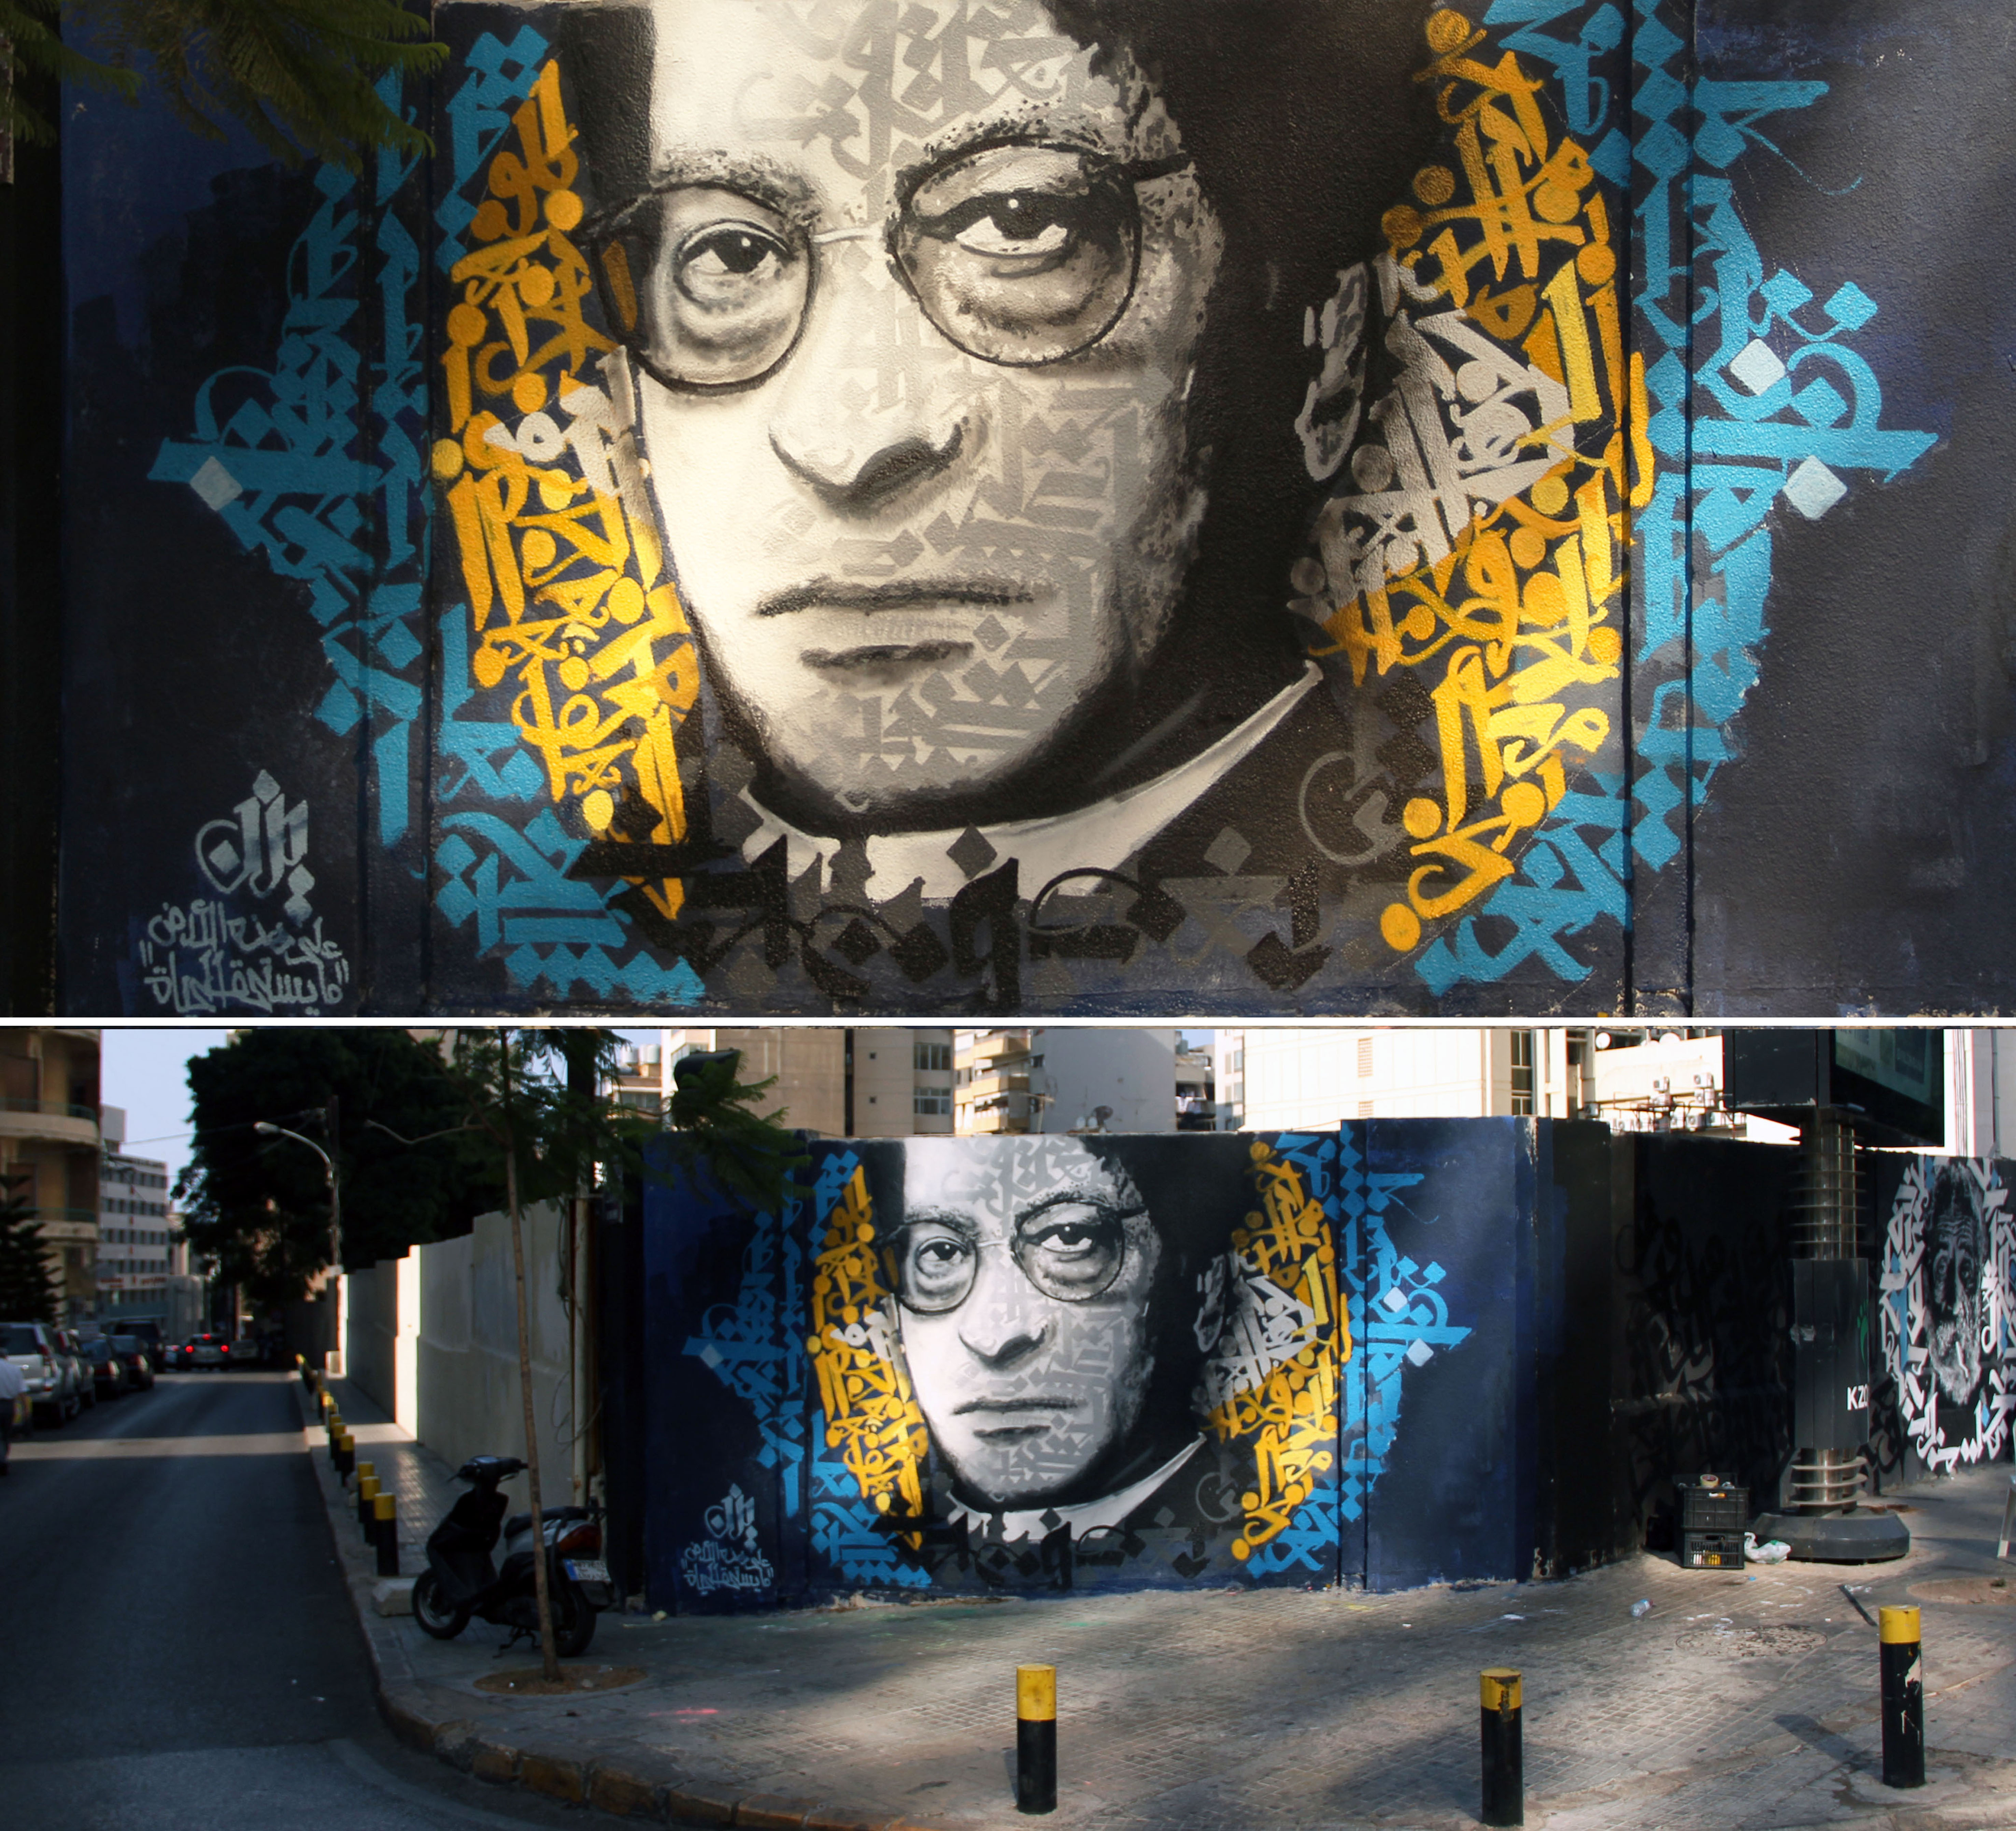 Palestinian poet Mahmoud Darwish in Hamra, Beirut. This mural was vandalized and Yazan decided to repaint it in Tunisia, where Darwish spent a part of his life.